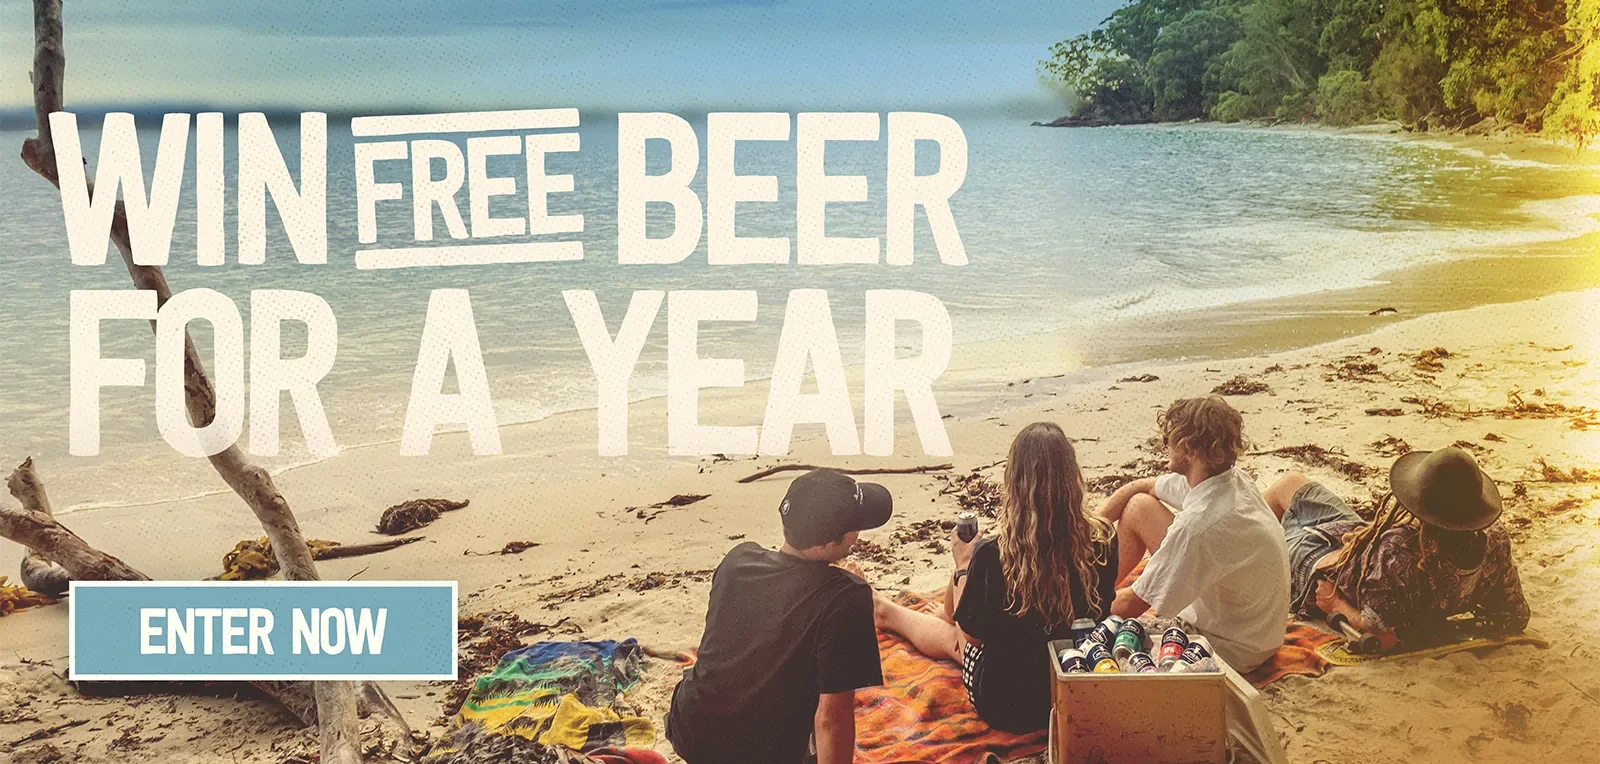 Win Free Beer For a Year